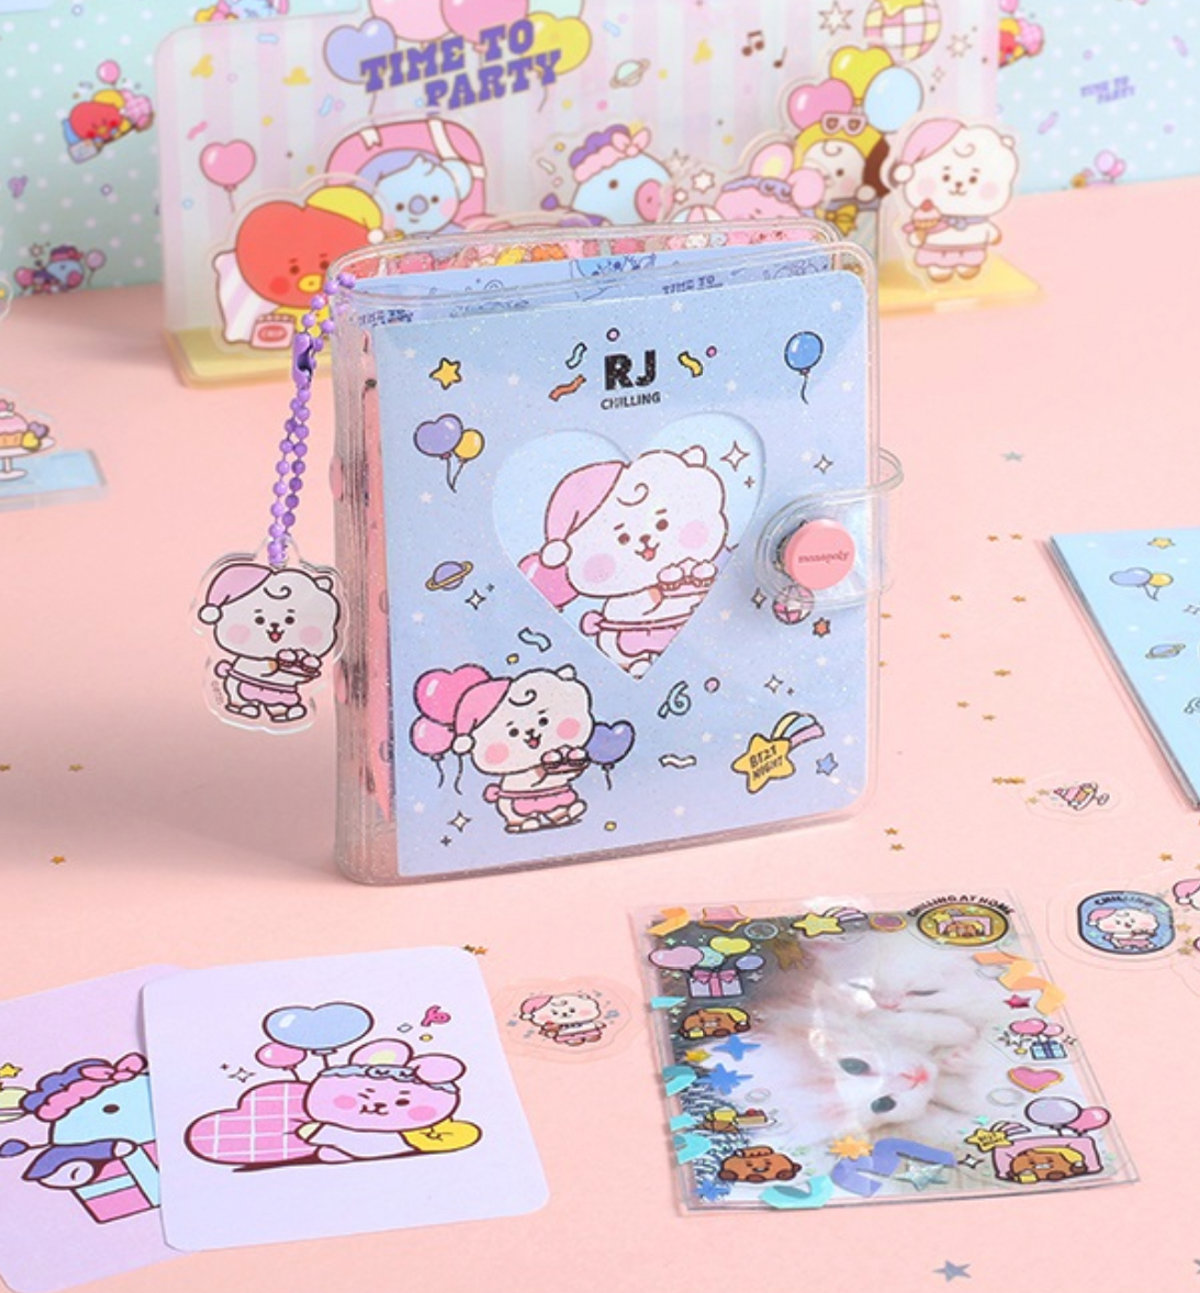 BT21 Collect Book [Party]